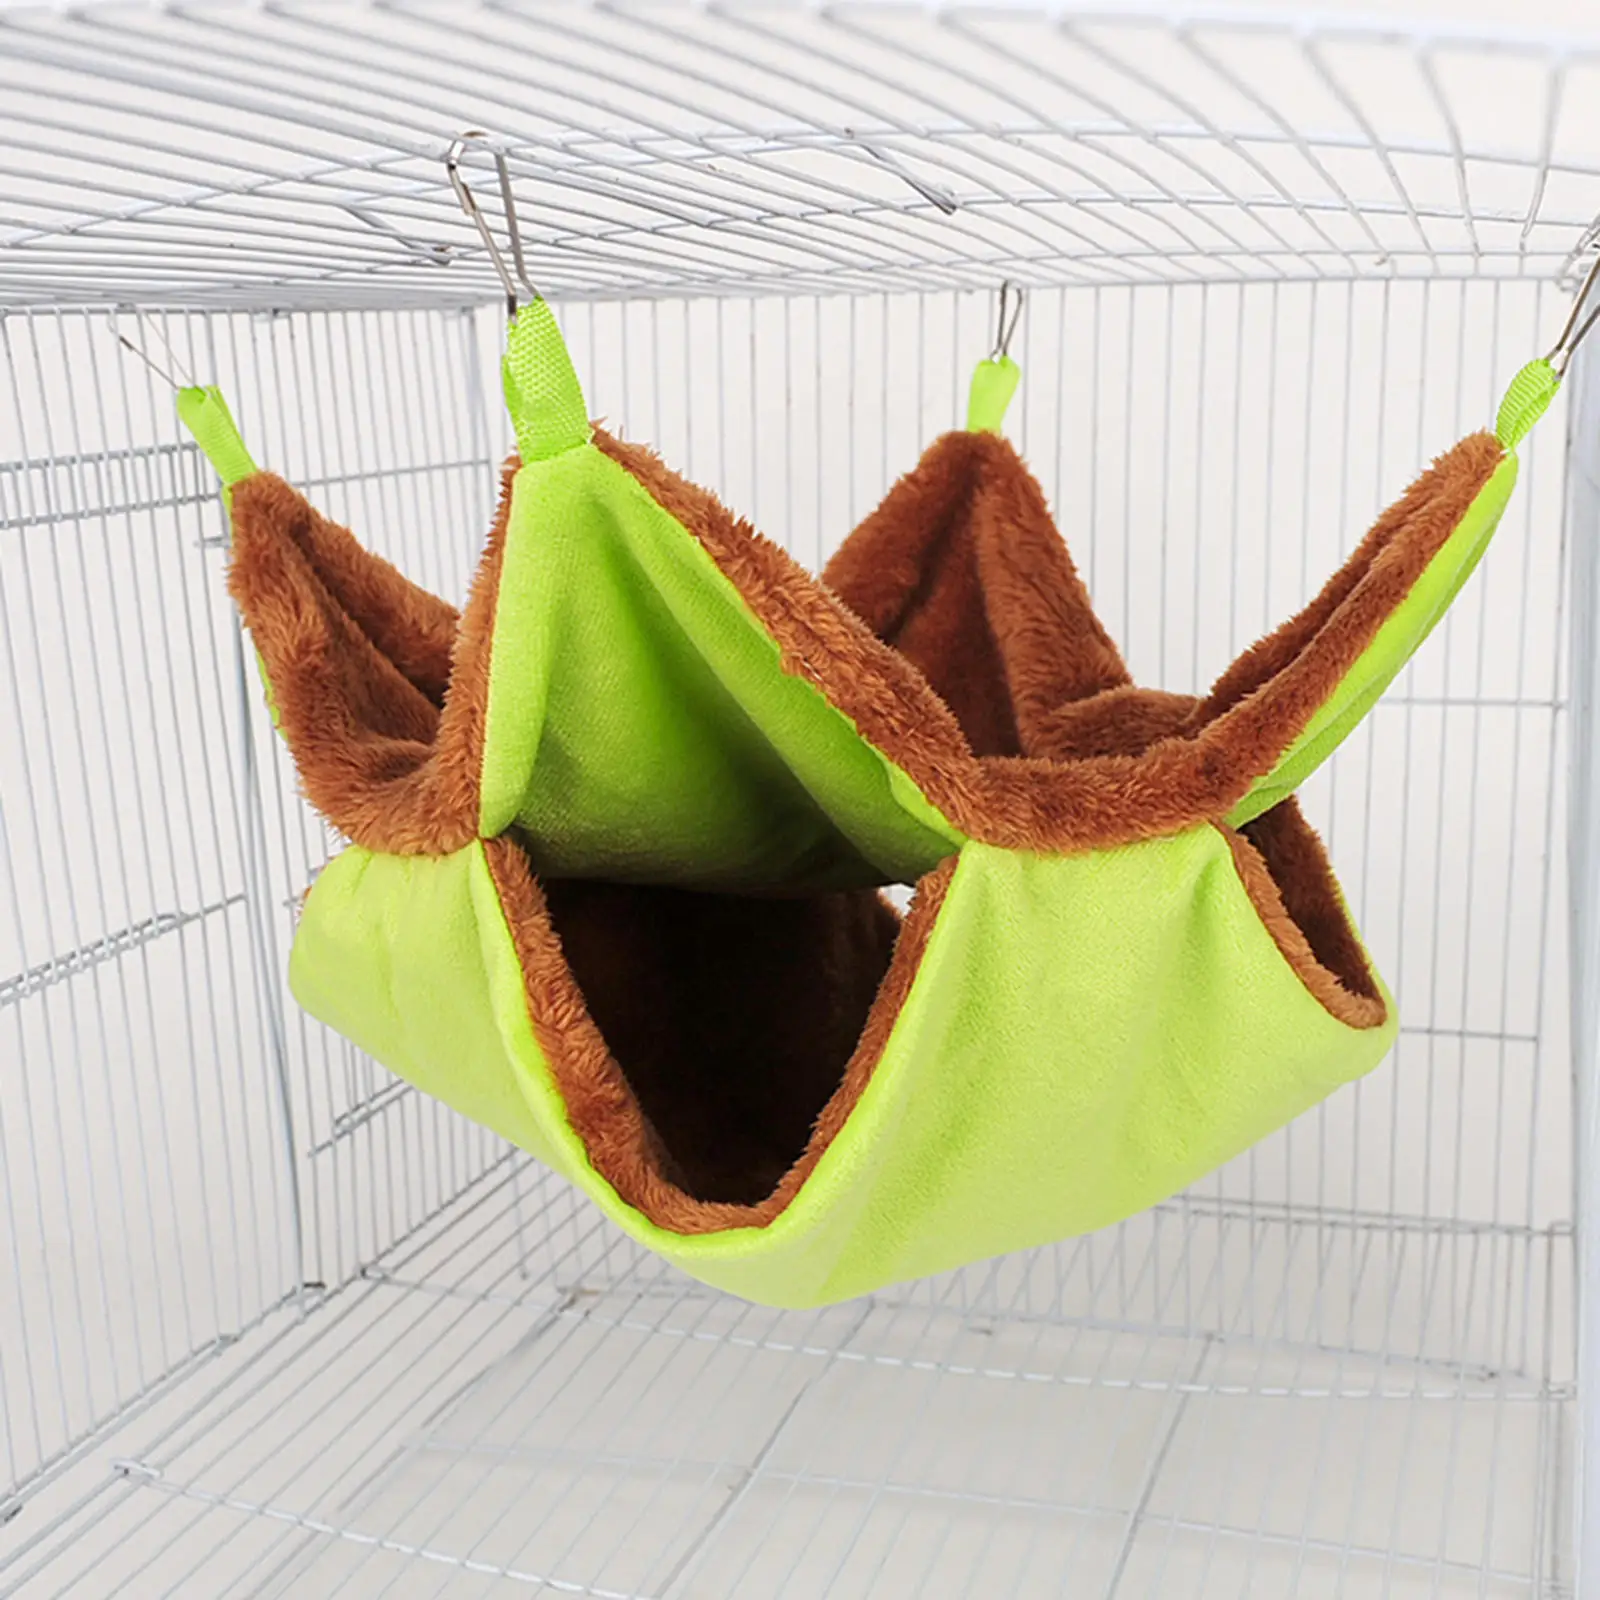 Warm Hamster Hammock Rat Hanging Beds House Small Animal Cage Squirrel Guinea Pig Double Layer Plush Cotton Nests Pets Supplies